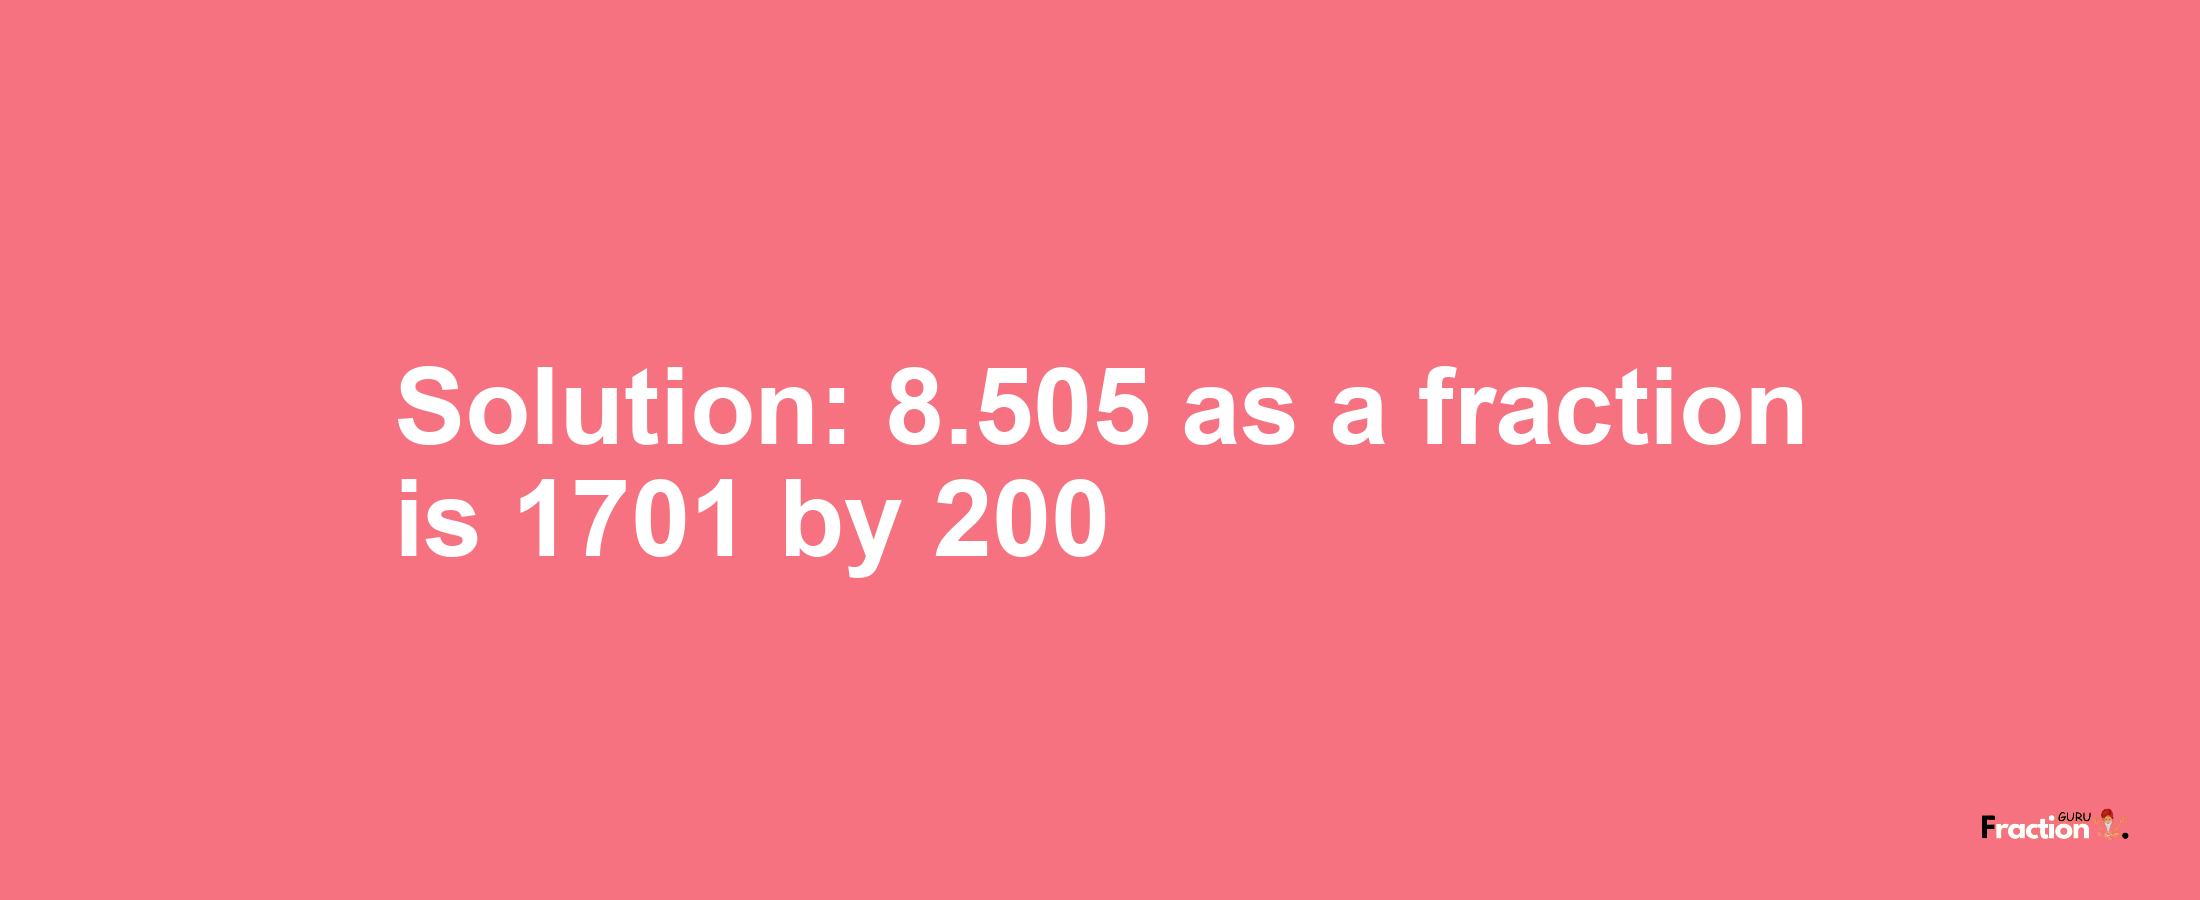 Solution:8.505 as a fraction is 1701/200